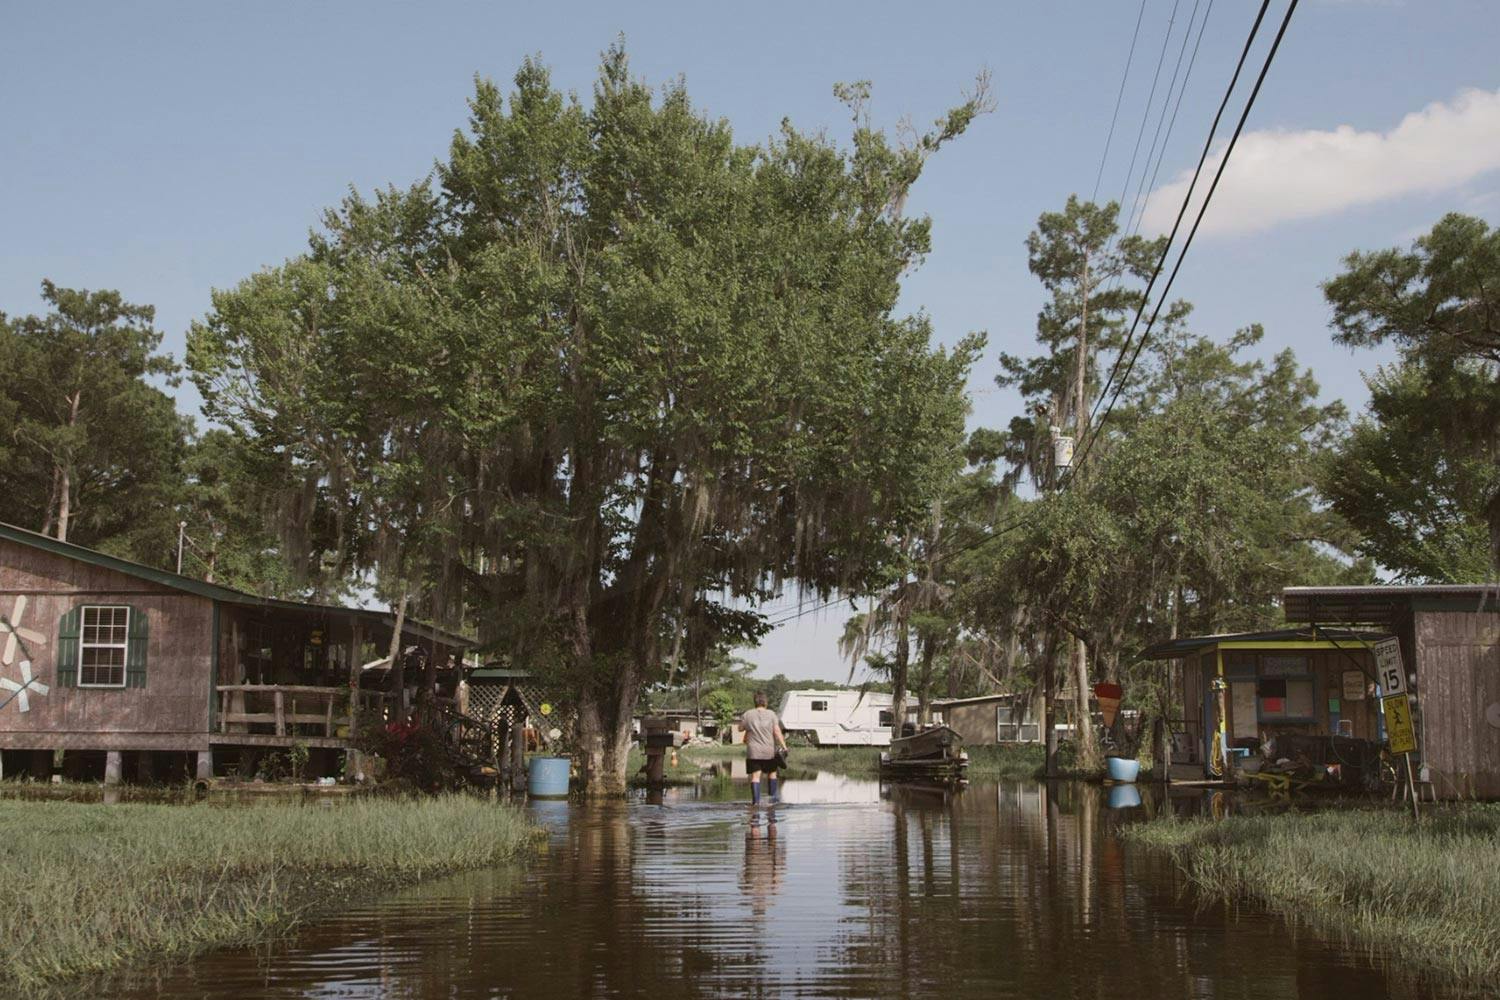 A flooded neighbourhood in Pierre Part, Louisiana. Trees loom over wooden homes sitting on struts above the floodwater.